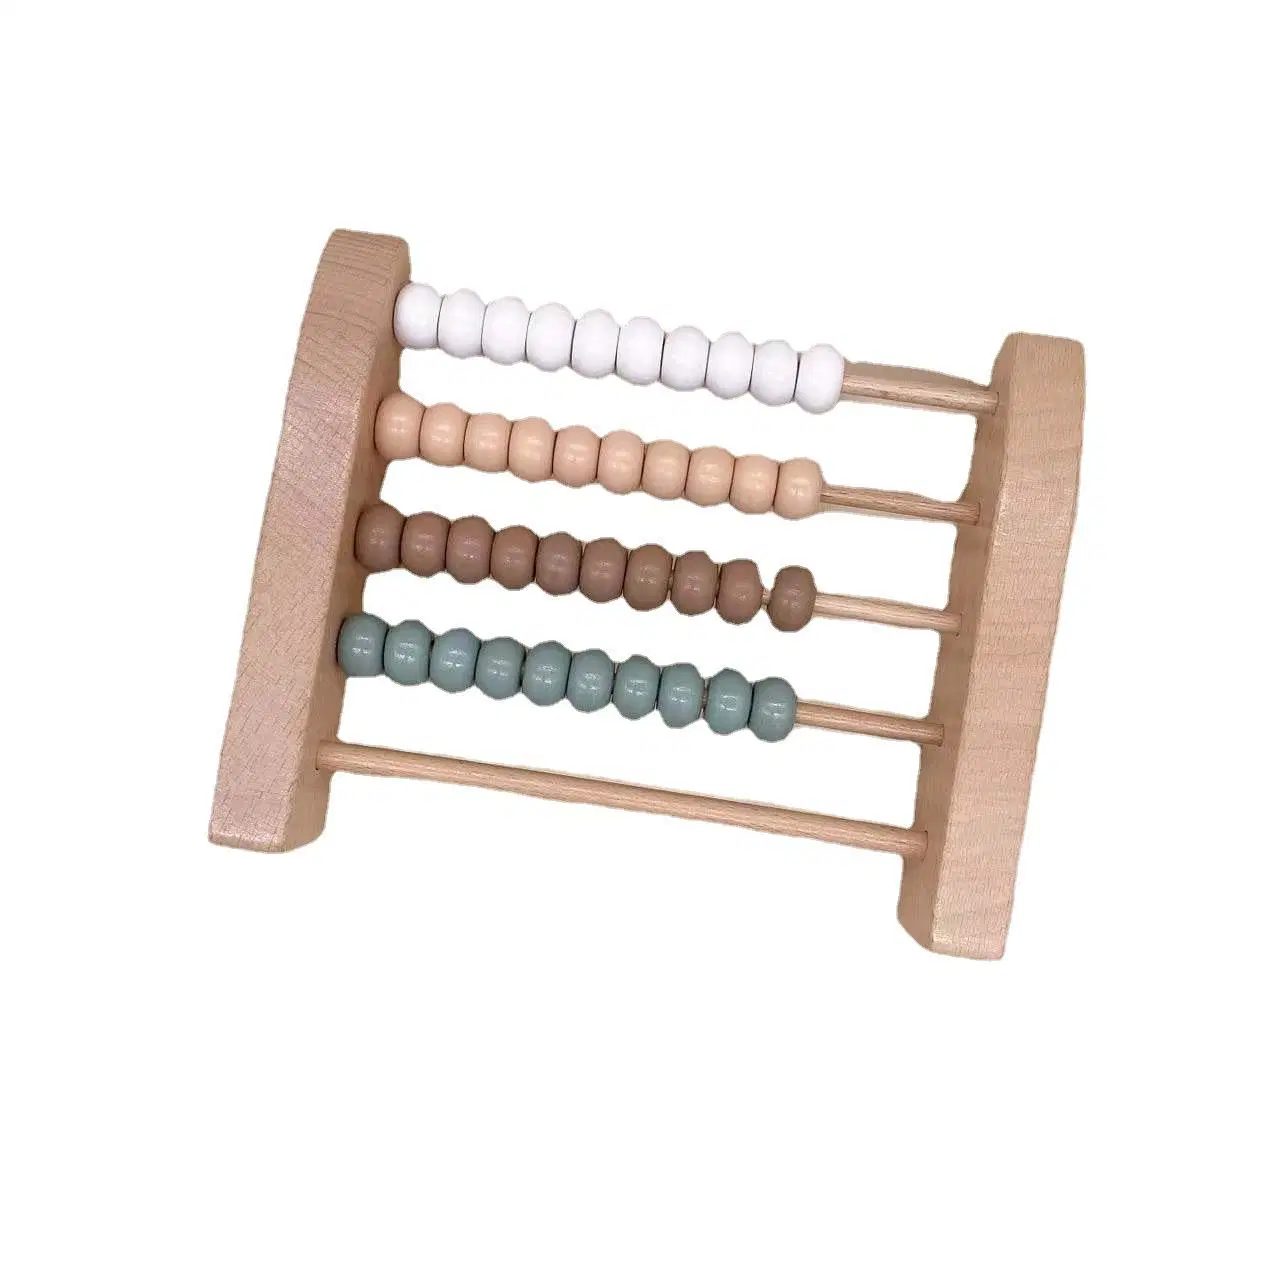 Wooden Bead Abacus Bead Counting Game Early Math Skill Developing